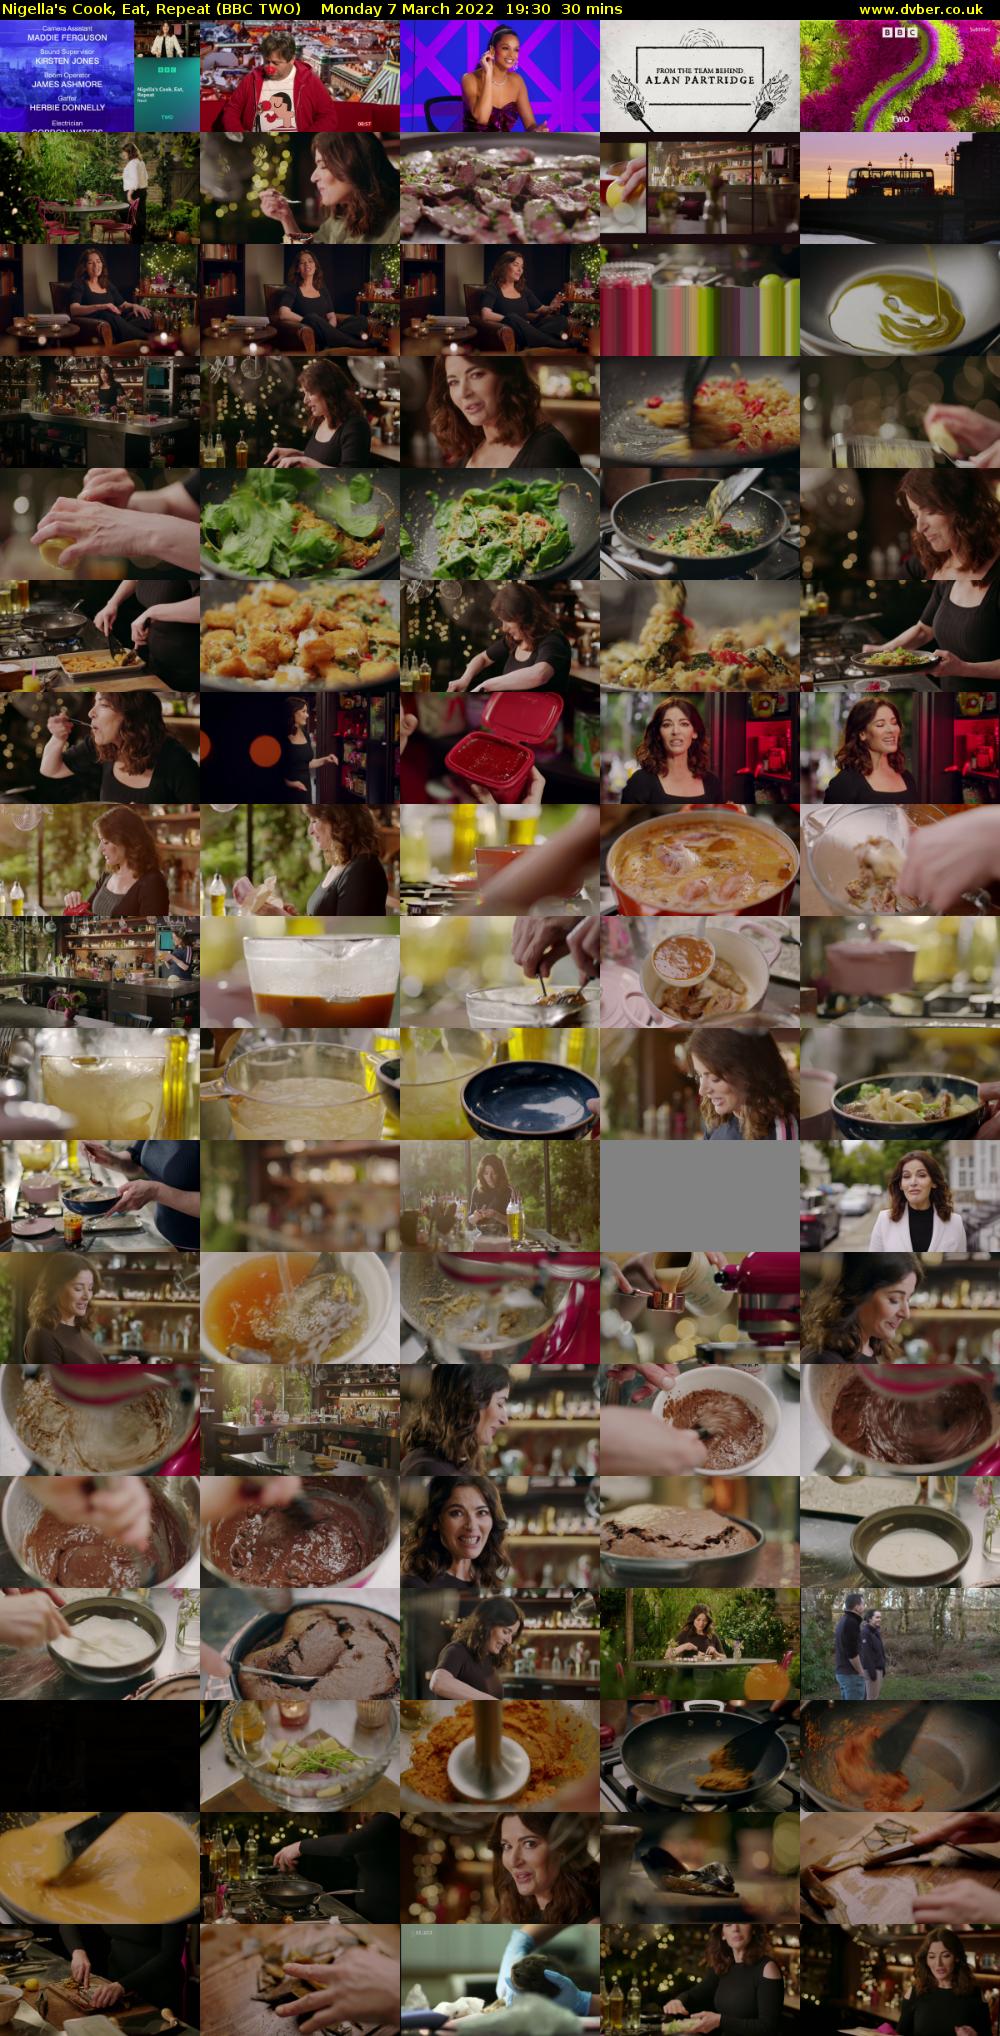 Nigella's Cook, Eat, Repeat (BBC TWO) Monday 7 March 2022 19:30 - 20:00